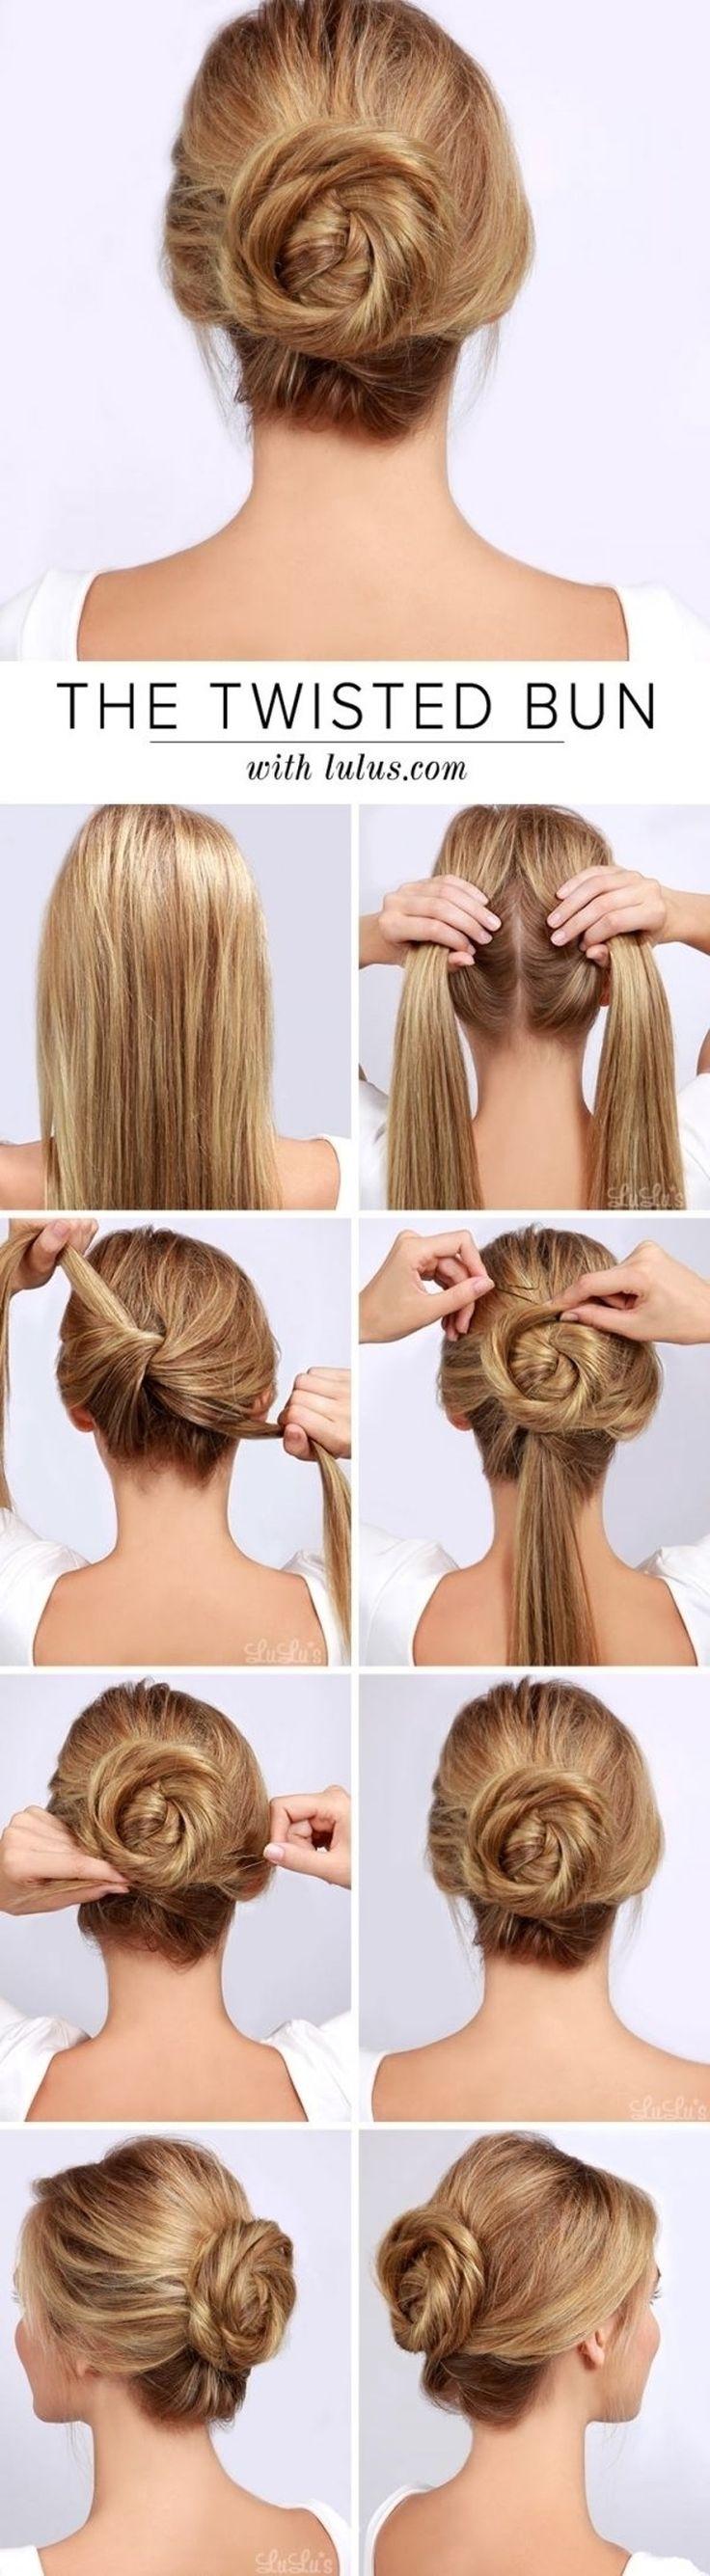 Wedding - 50 Simple Five Minute Hairstyles For Office Women: DIY